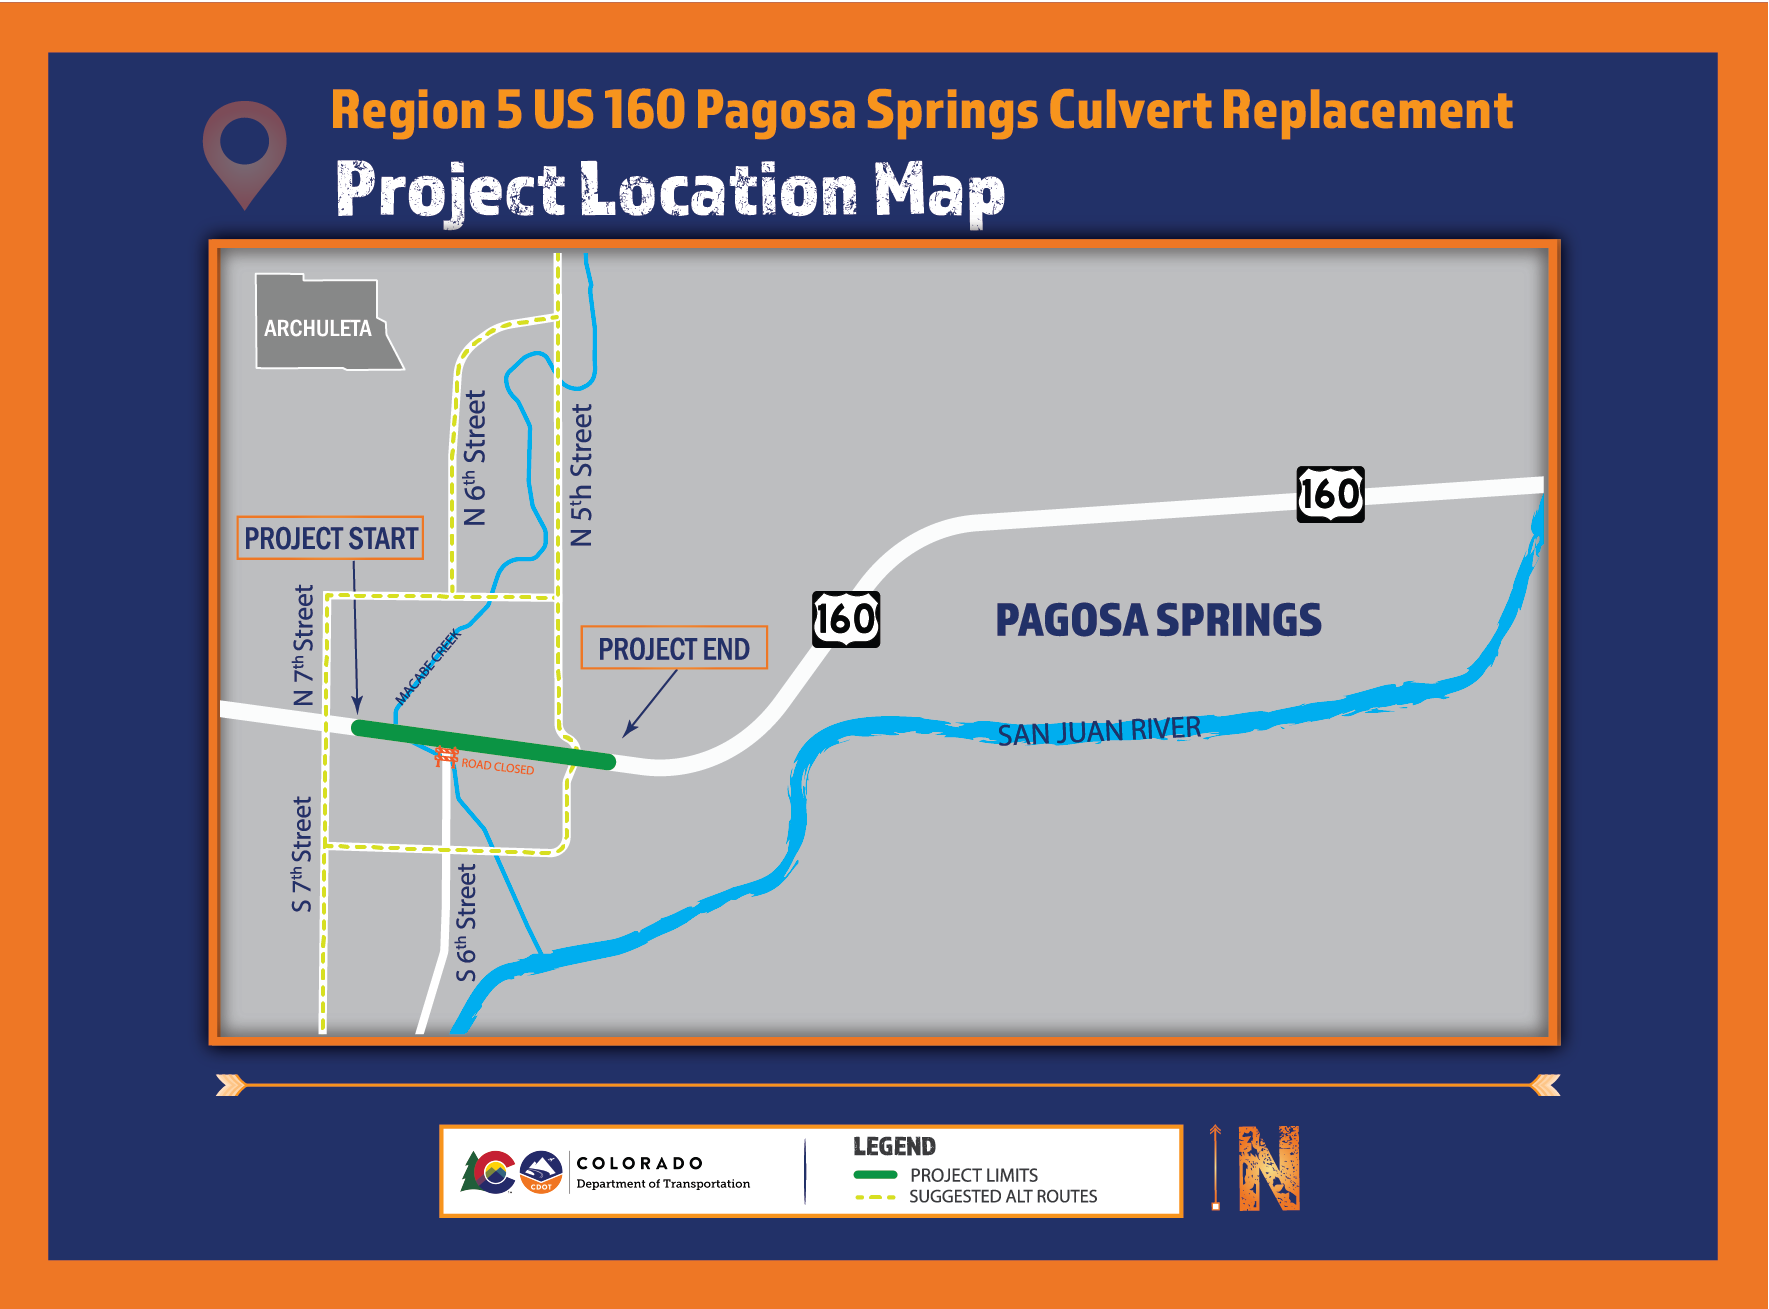 Region 5 US 160 Pagosa Springs Culvert Replacement project location map detail image